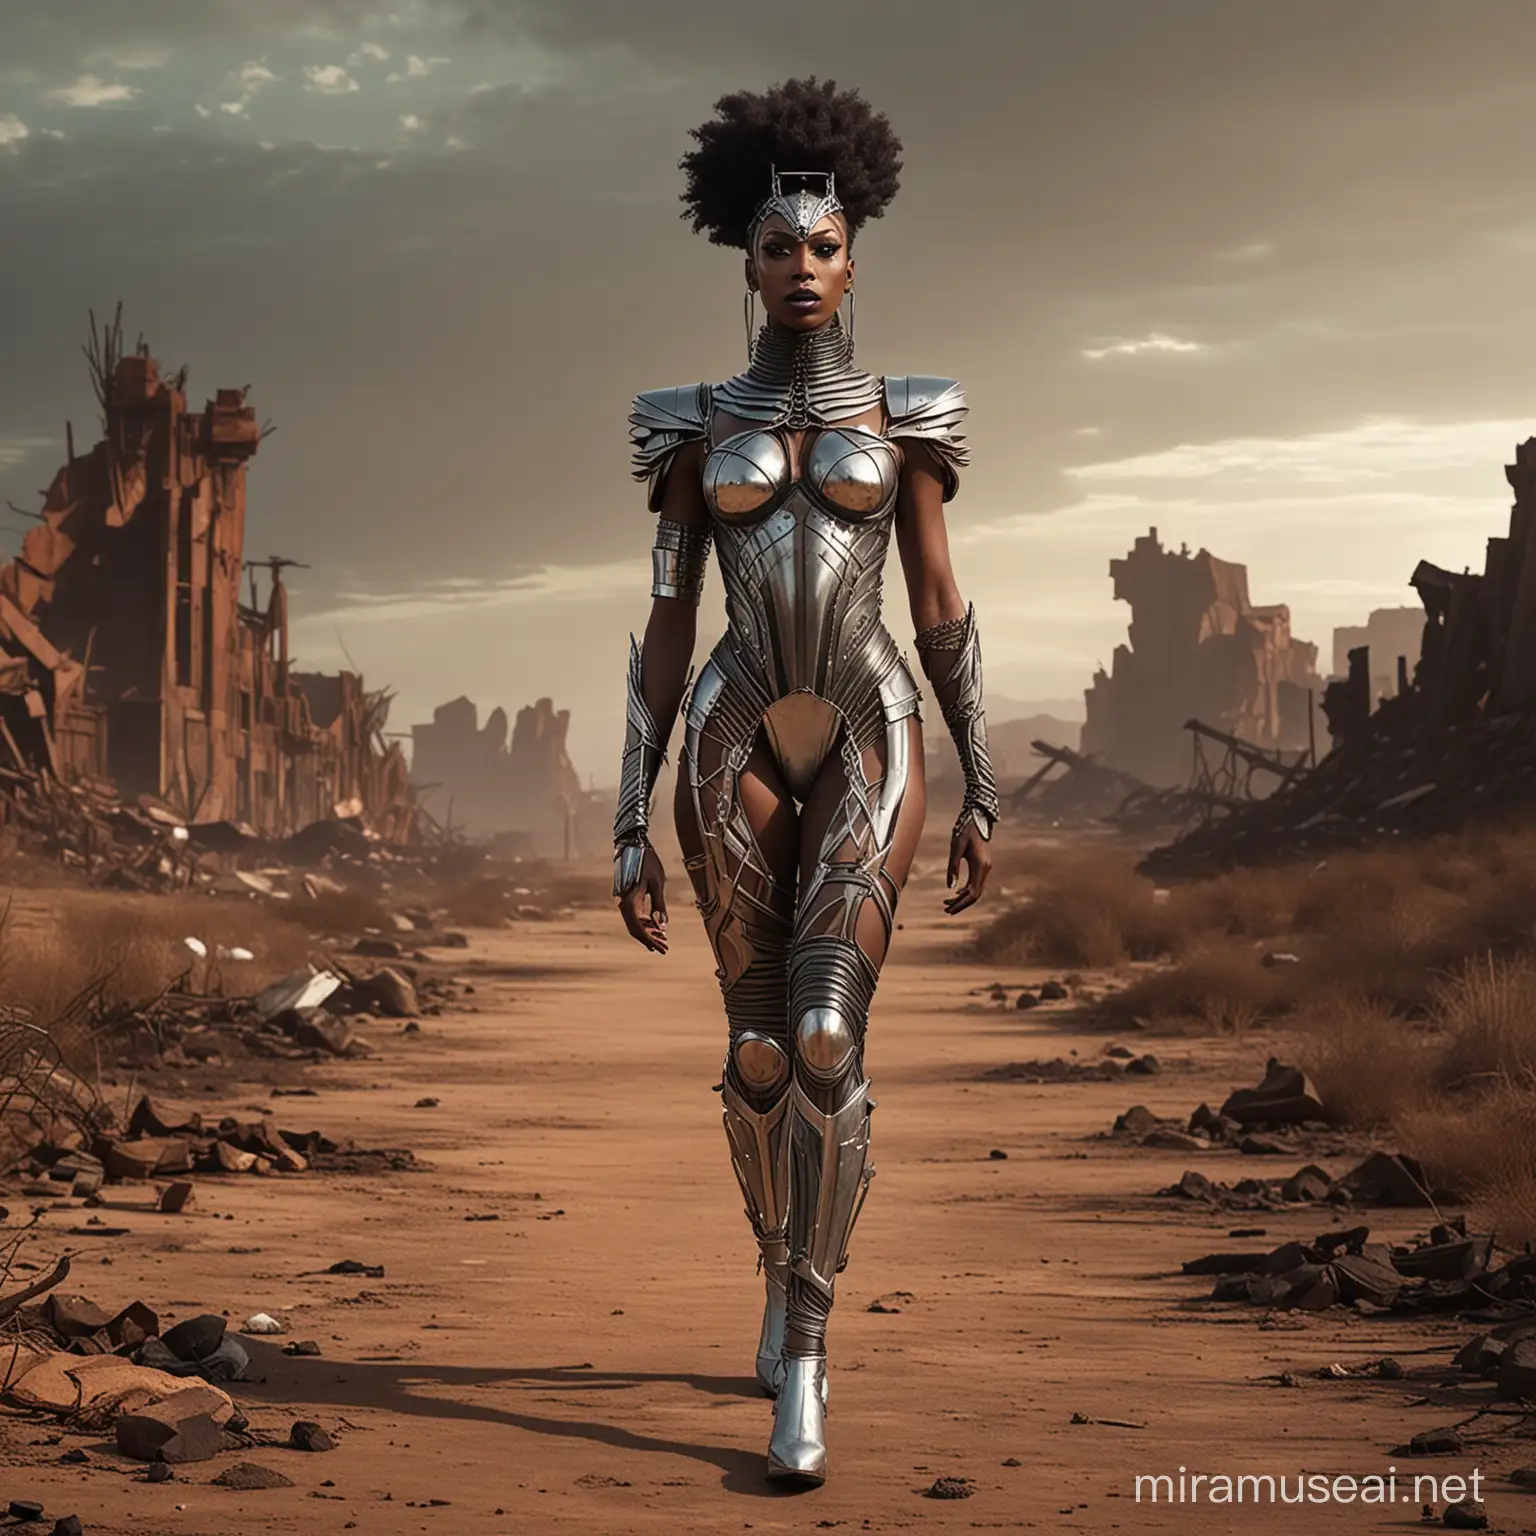 Futuristic Monarch Stylish African American Drag Queen Strides in Apocalyptic Landscape